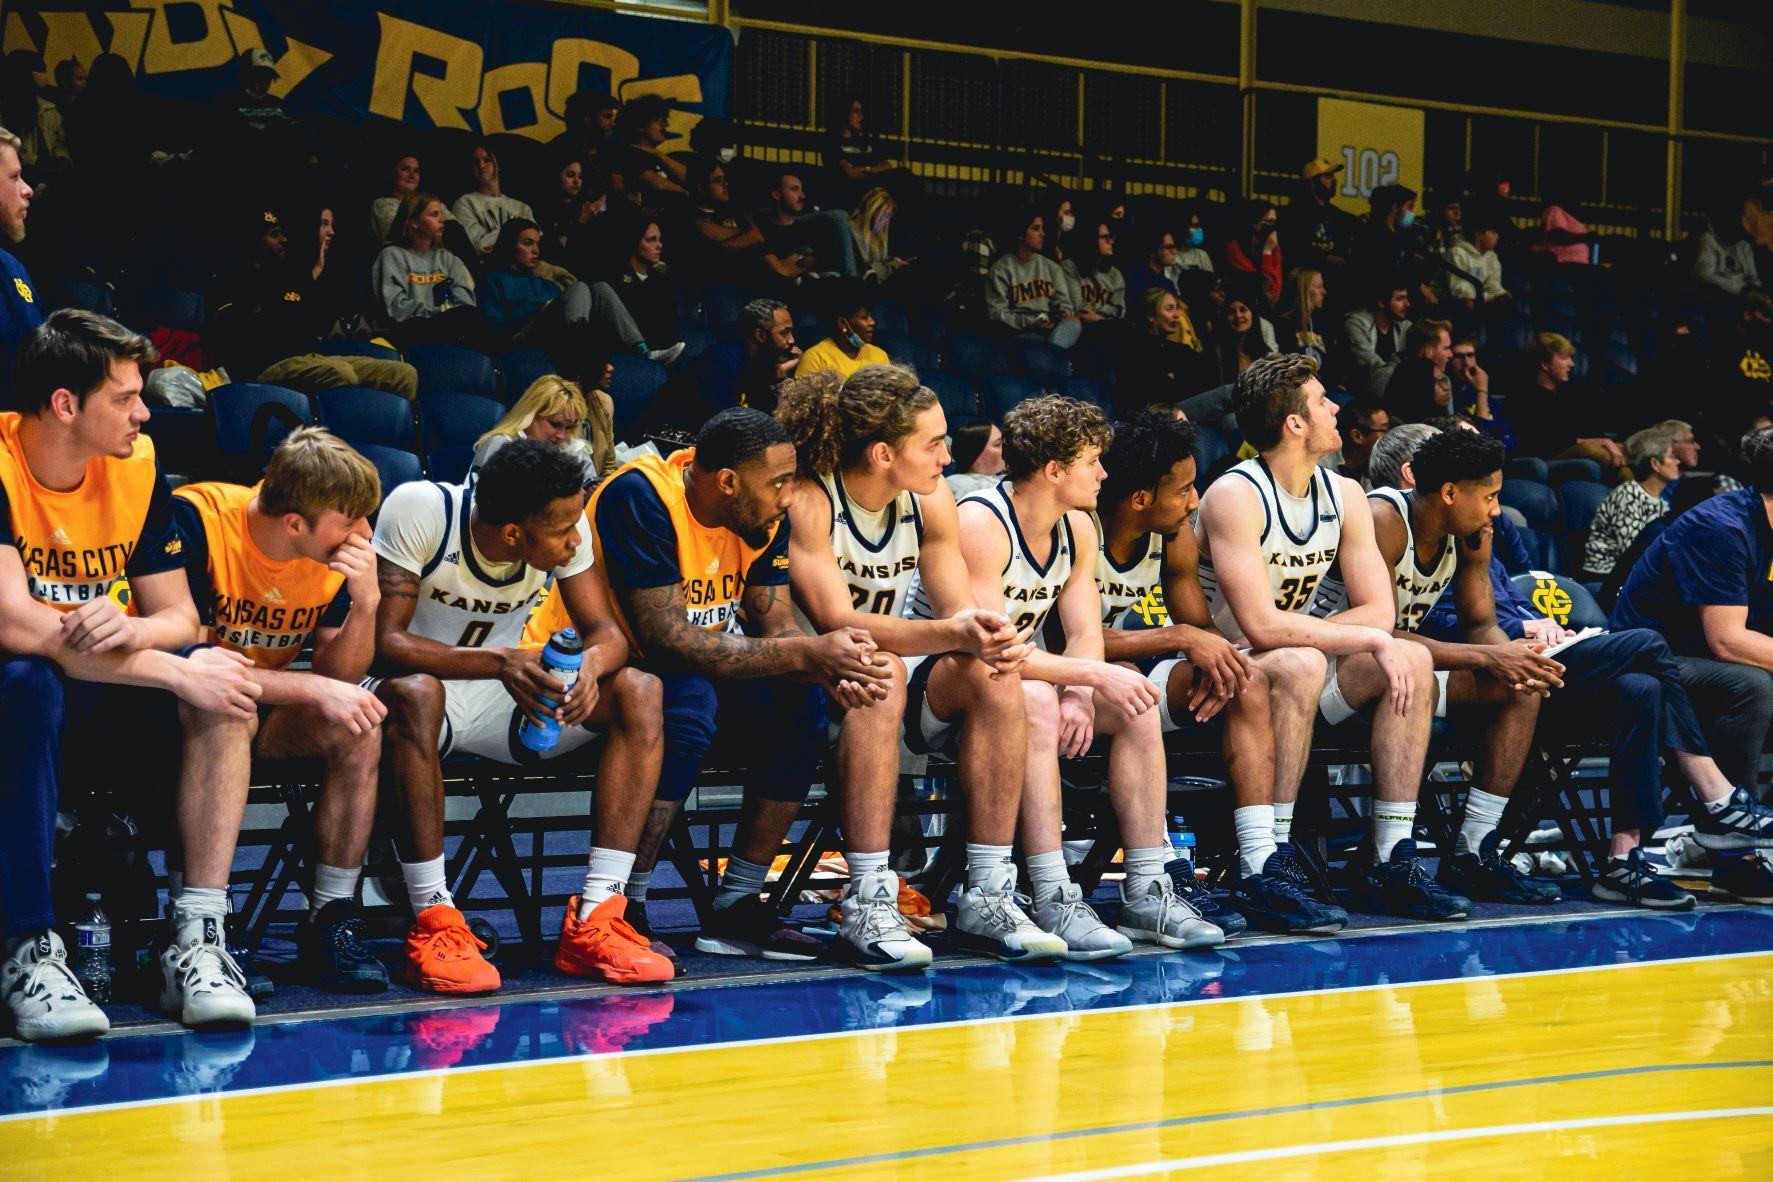 The Roos will look to secure second place in the Summit League with a win. (Julia Kapros/Roo News)